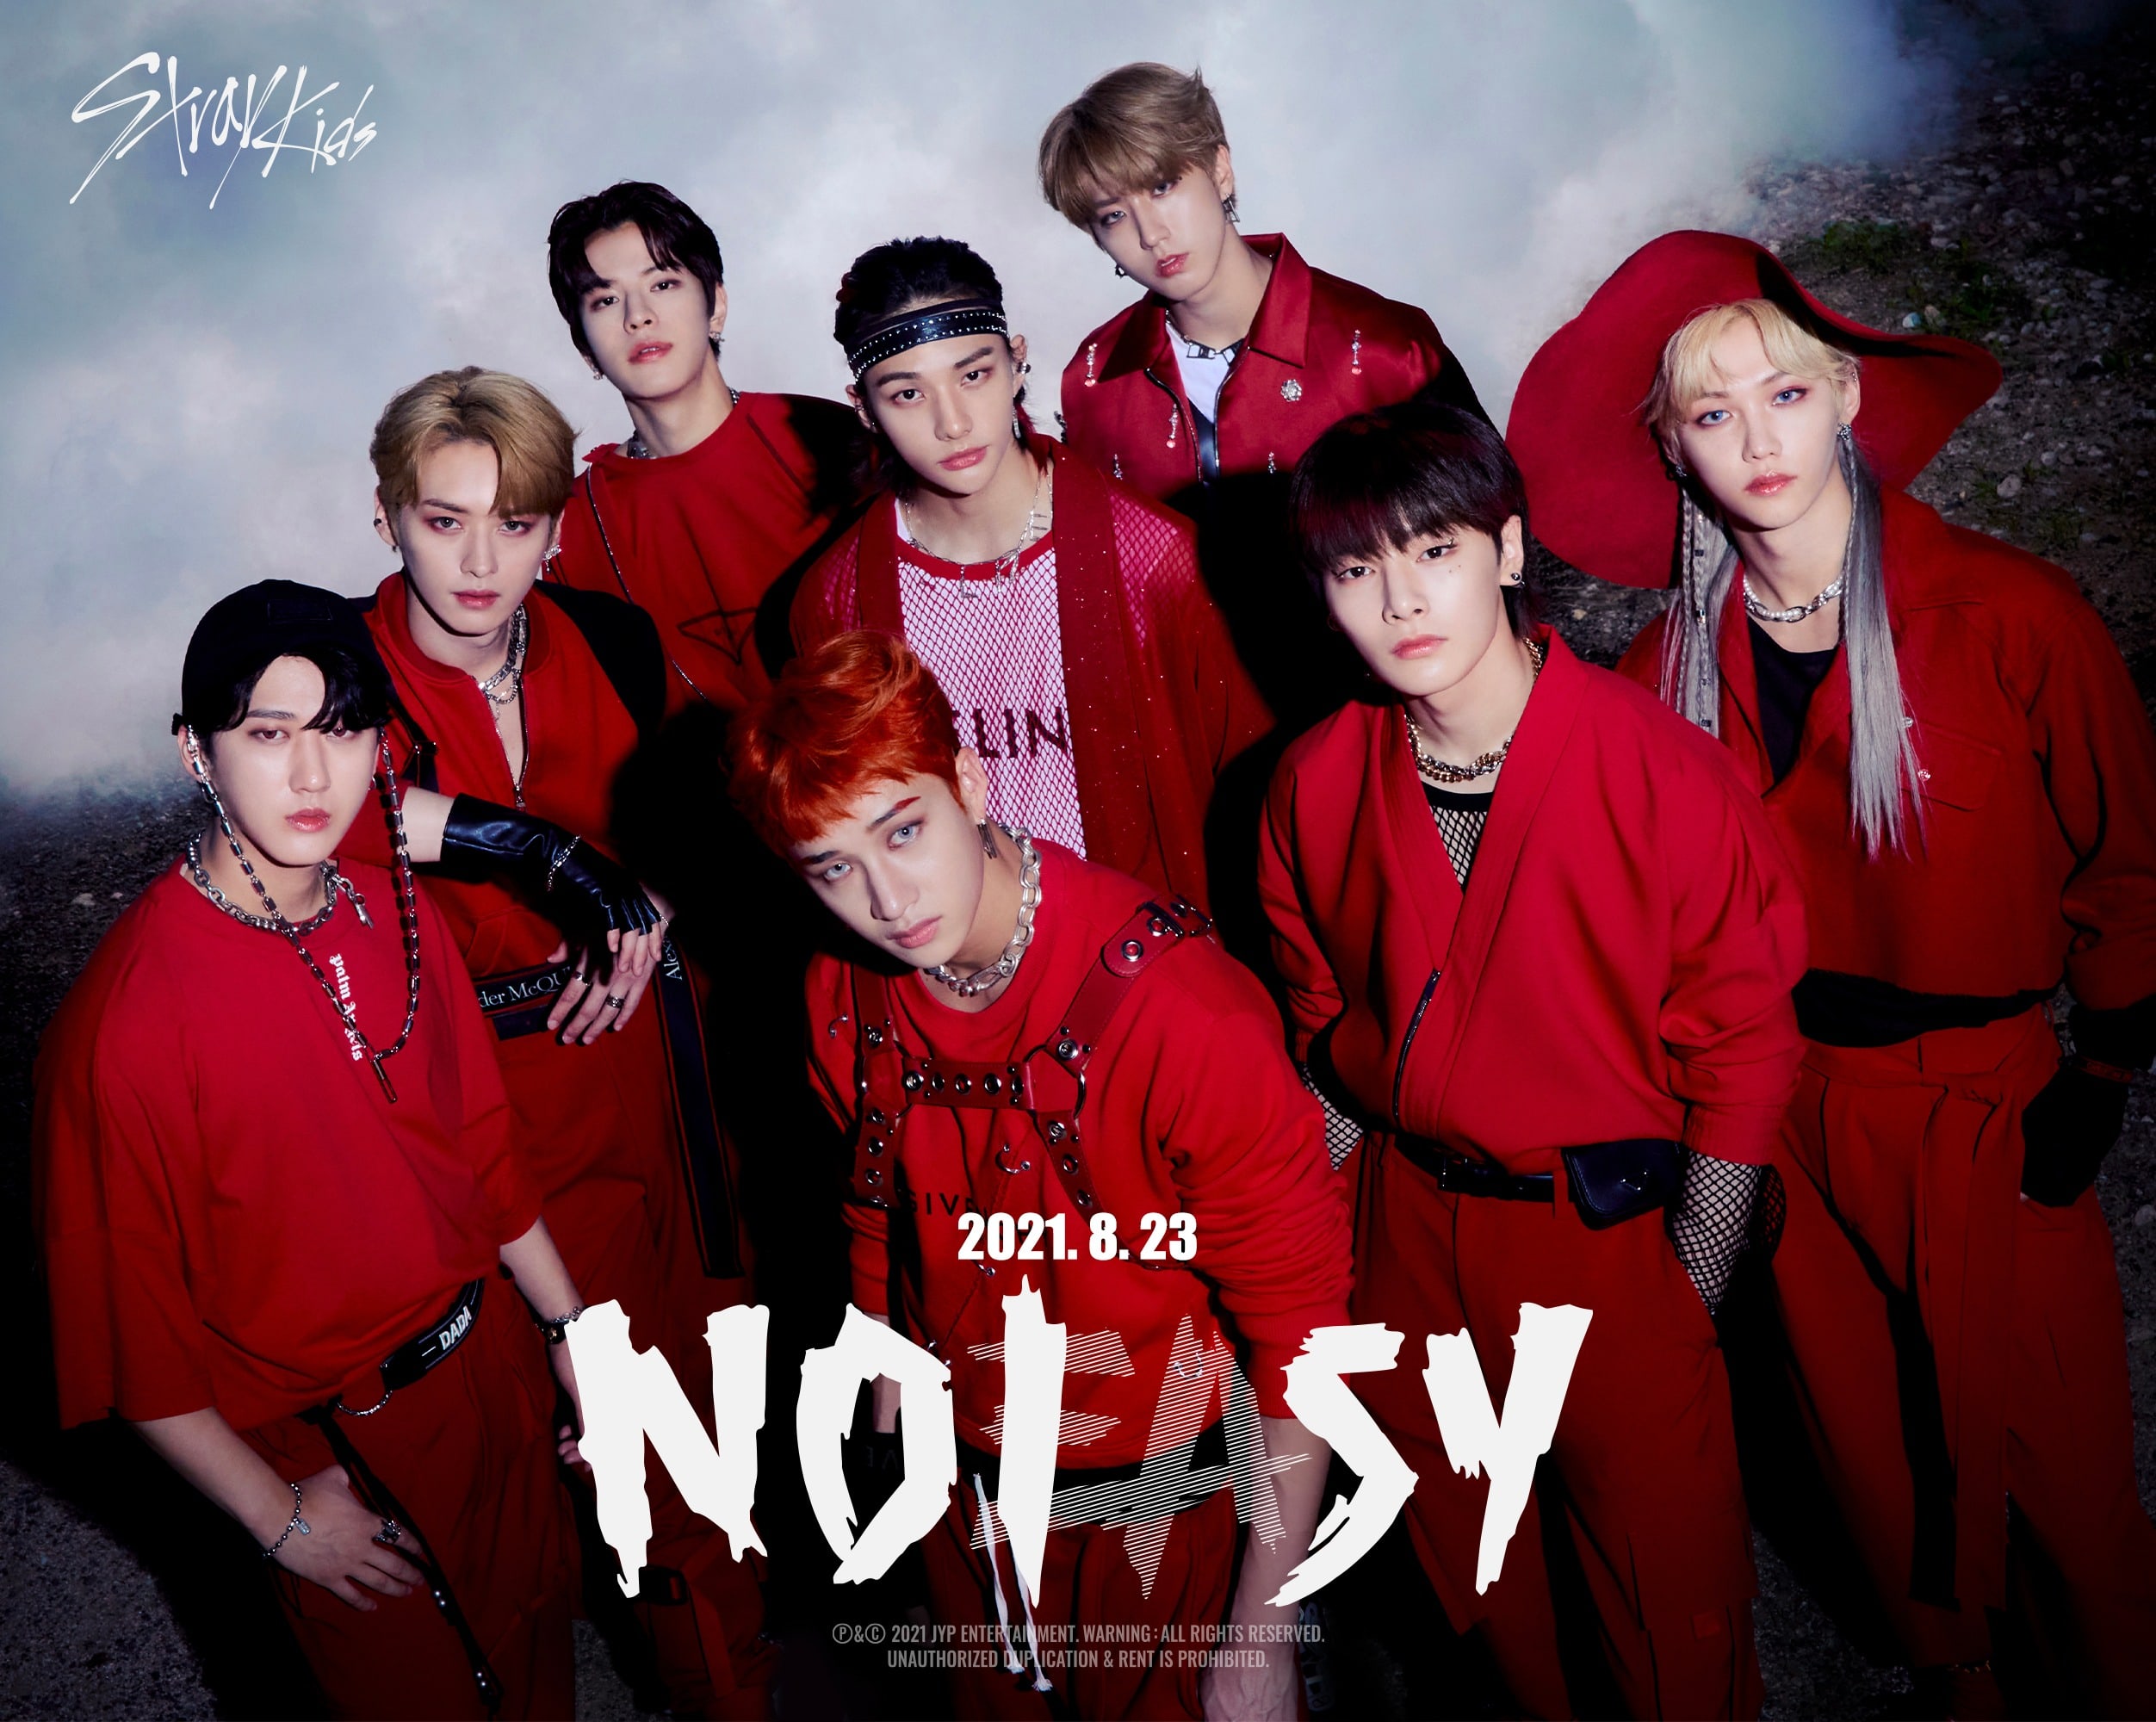 'Sorry, I love You' says Stray Kids as their Album 'NoEasy' Gears up ...